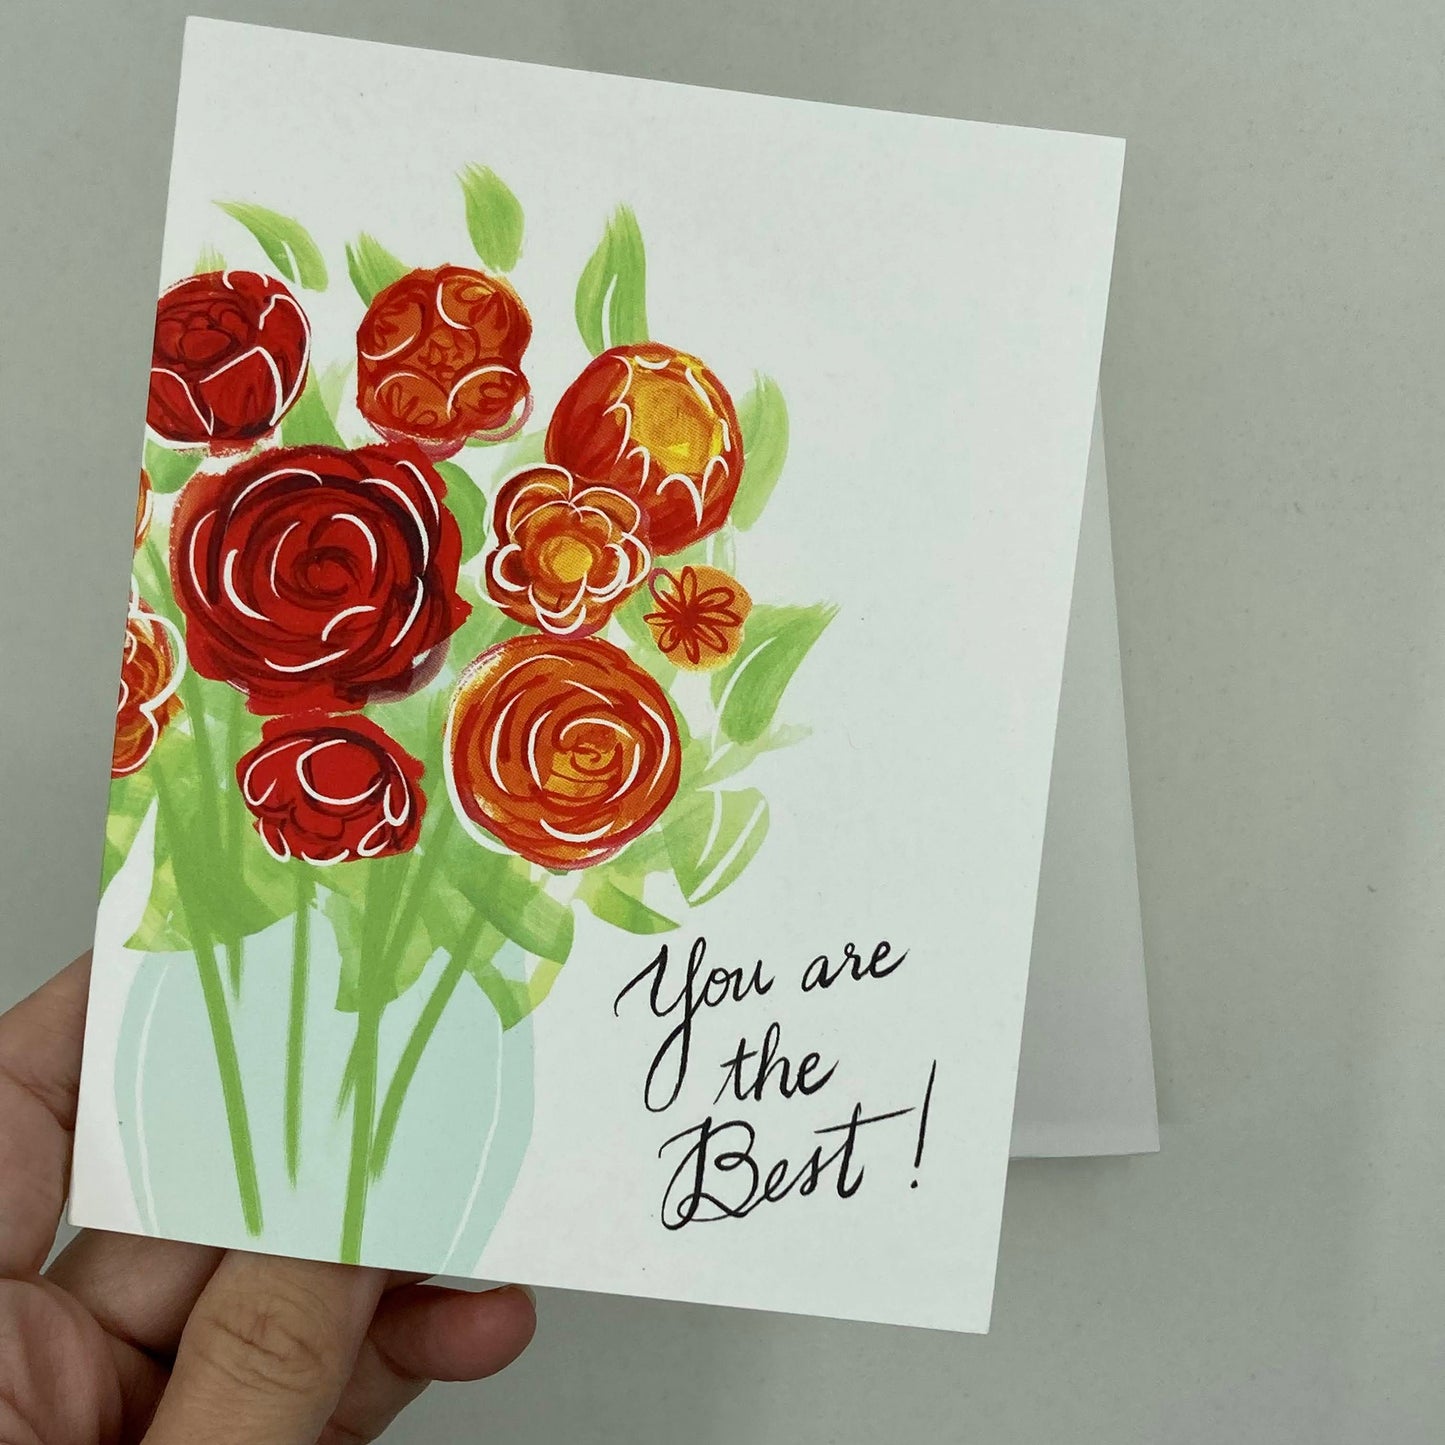 THANKS - You Are the Best - Greeting Card for Mom, Friend, Galentine, Eco-Friendly Notecards by Adriana Bergstrom (Adriprints)